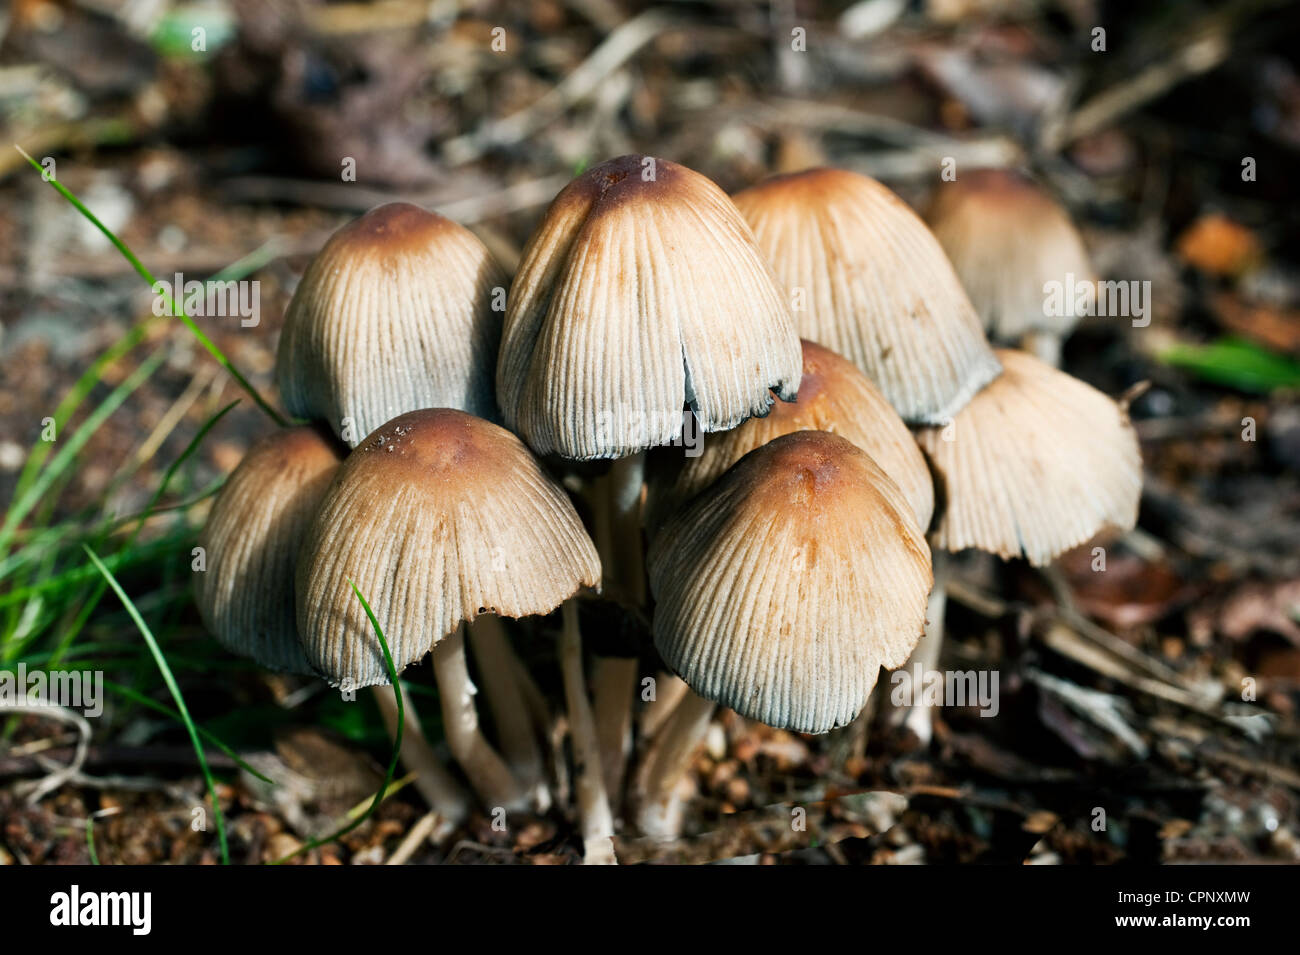 Toadstools growing from the decaying roots of a tree in a suburban garden Stock Photo